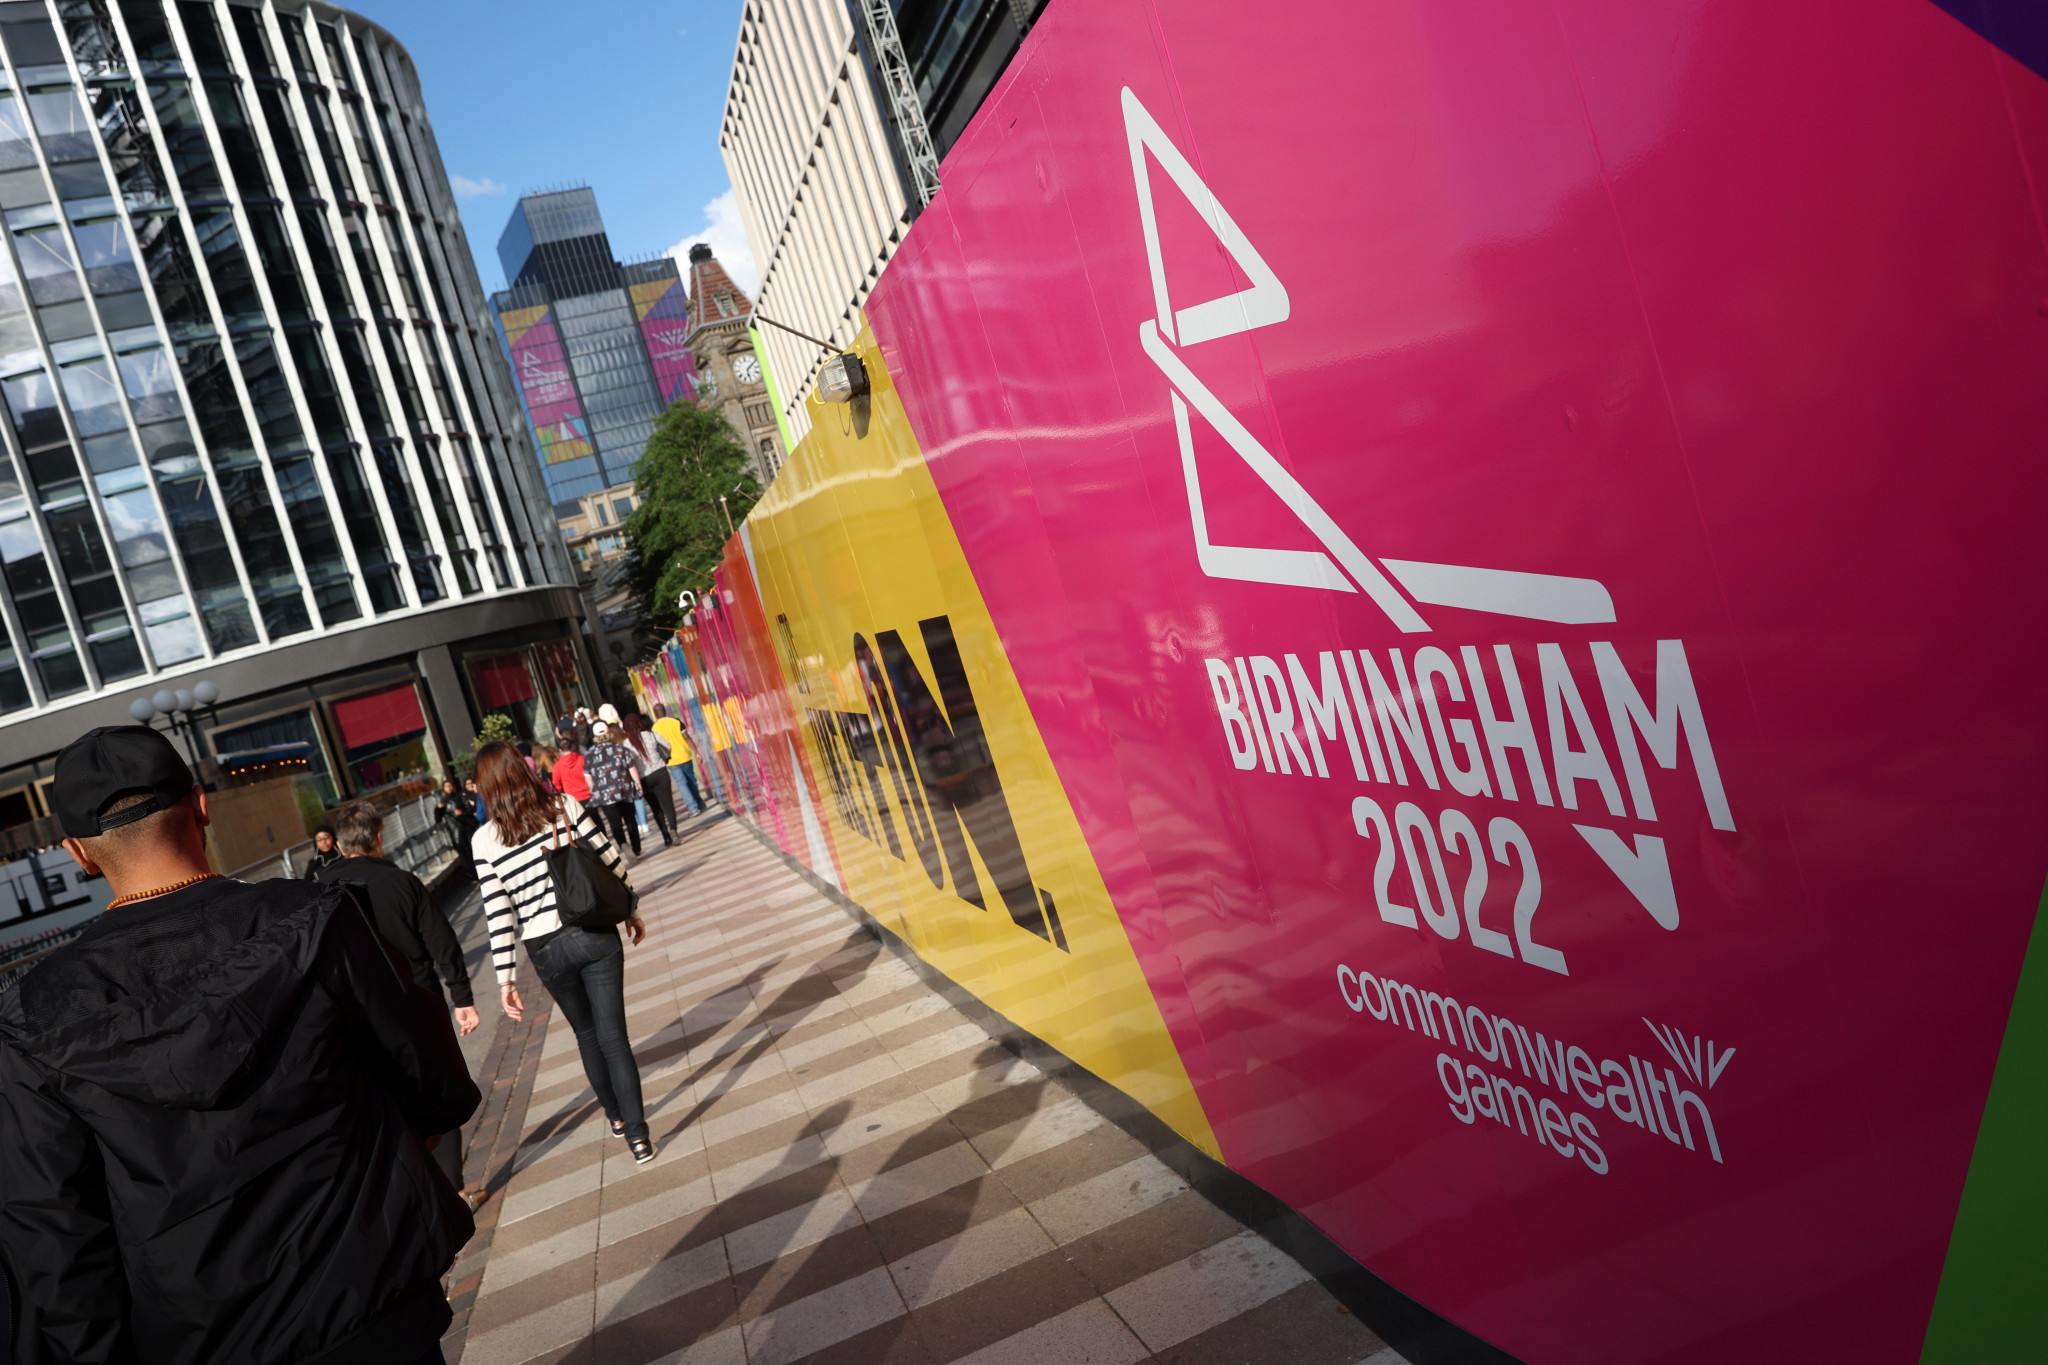 Birmingham has been ranked 34th in the world in the latest BCW Ranking of Sporting Cities ©Getty Images